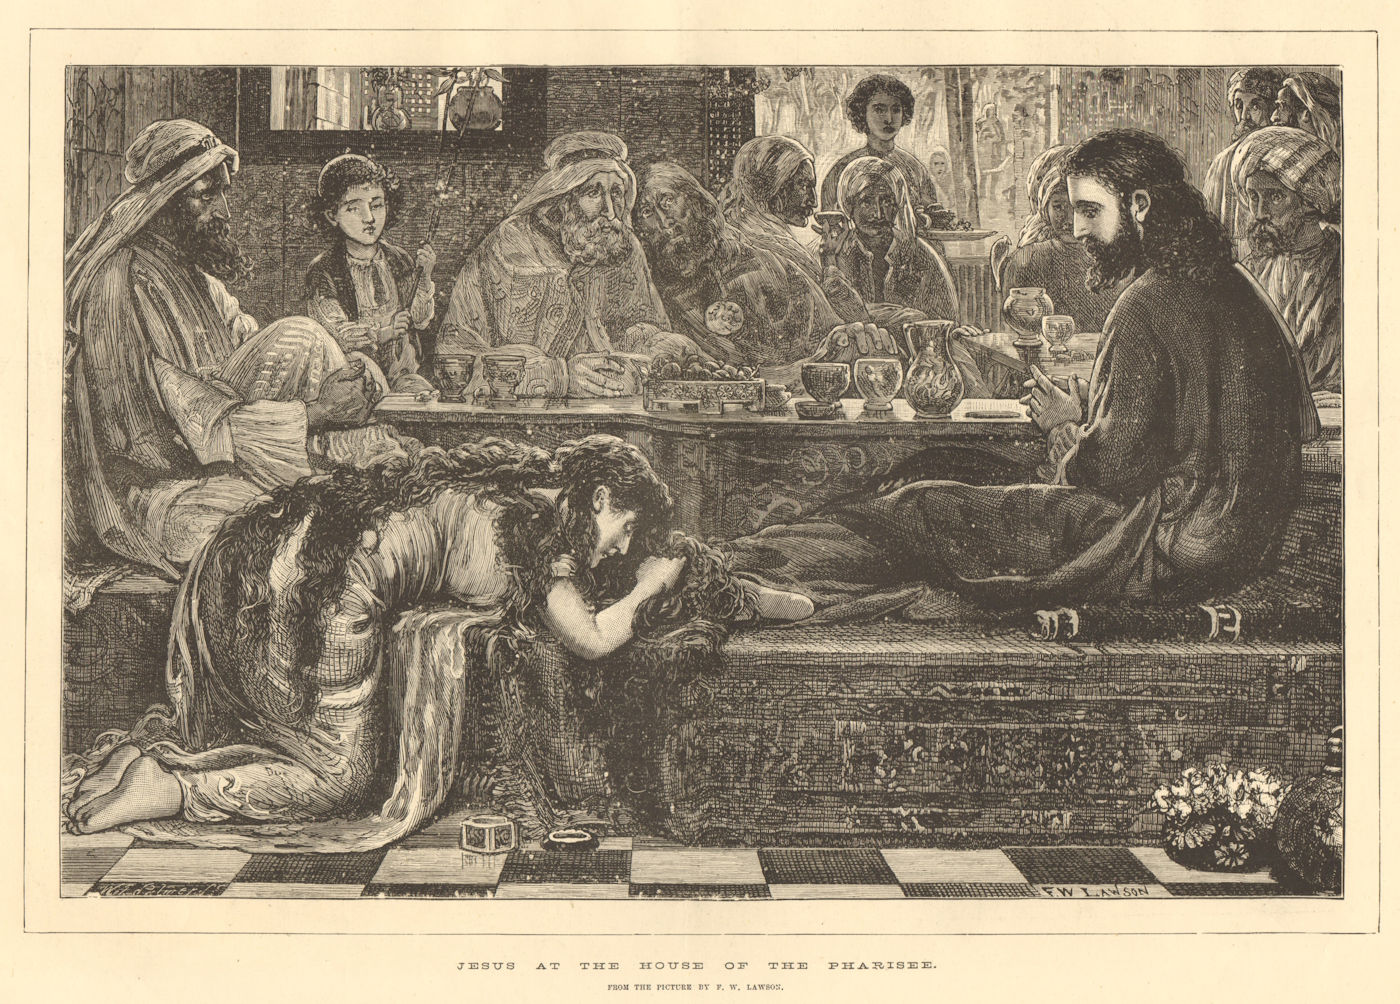 Associate Product Jesus at the house of the Pharisee, by F. W. Lawson. Bible. Fine arts 1881